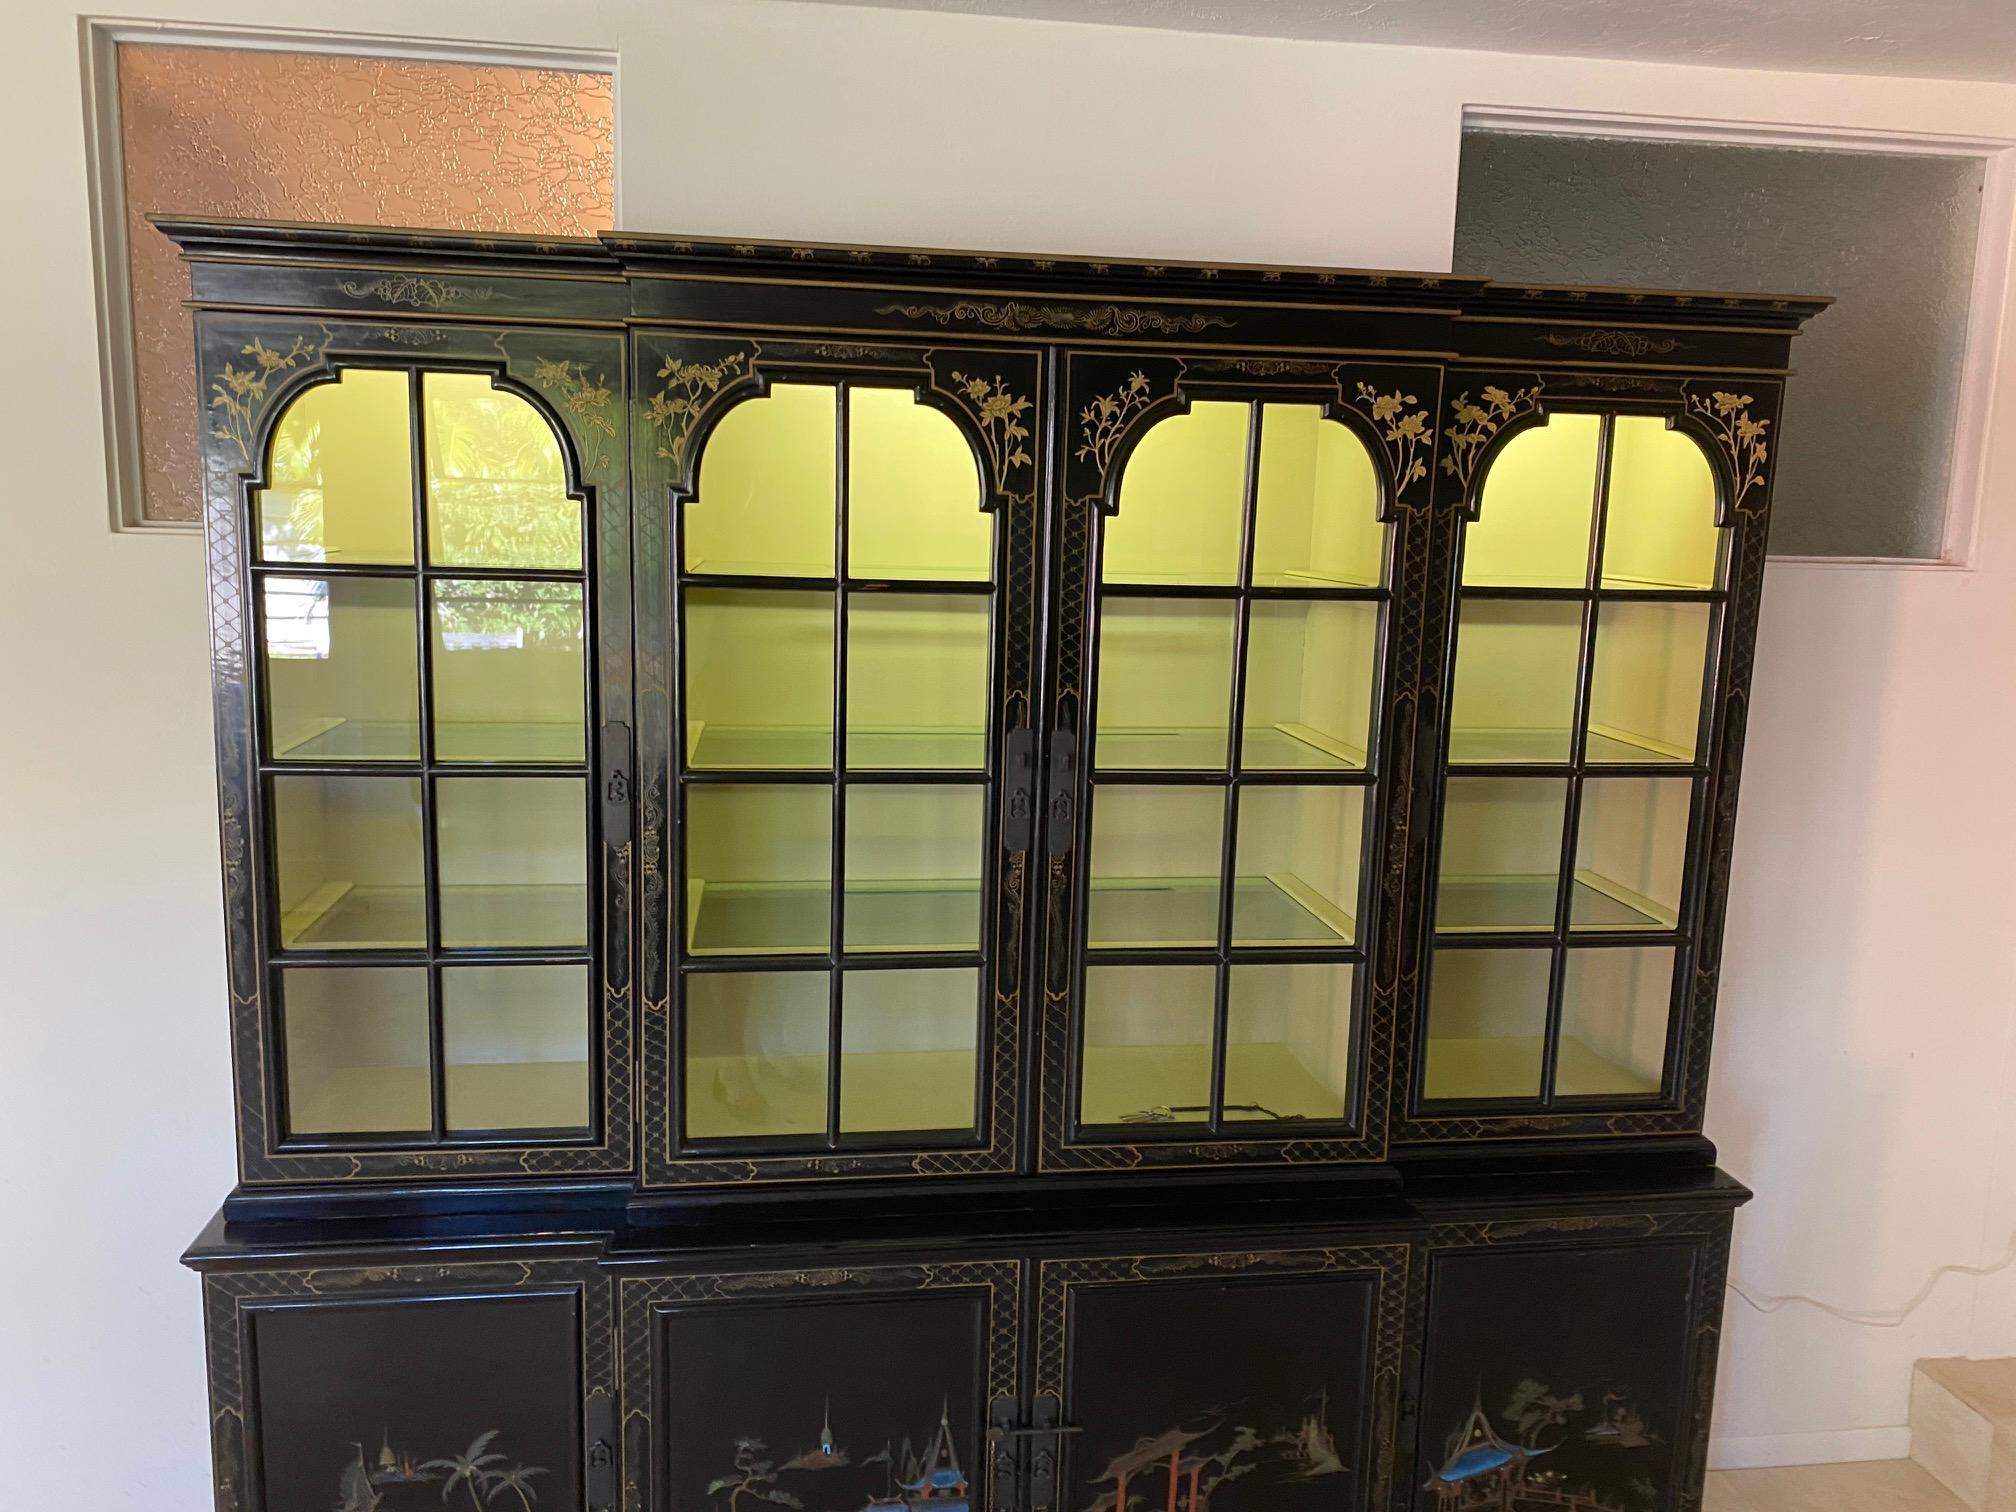 Teakwood breakfront hand painted with gold leaf breaks down into 2 pieces lighting in across top inside painted pale yellow inside having drawers in the center bottom maker J. L. George &Co., Ltd. Hong Kong.